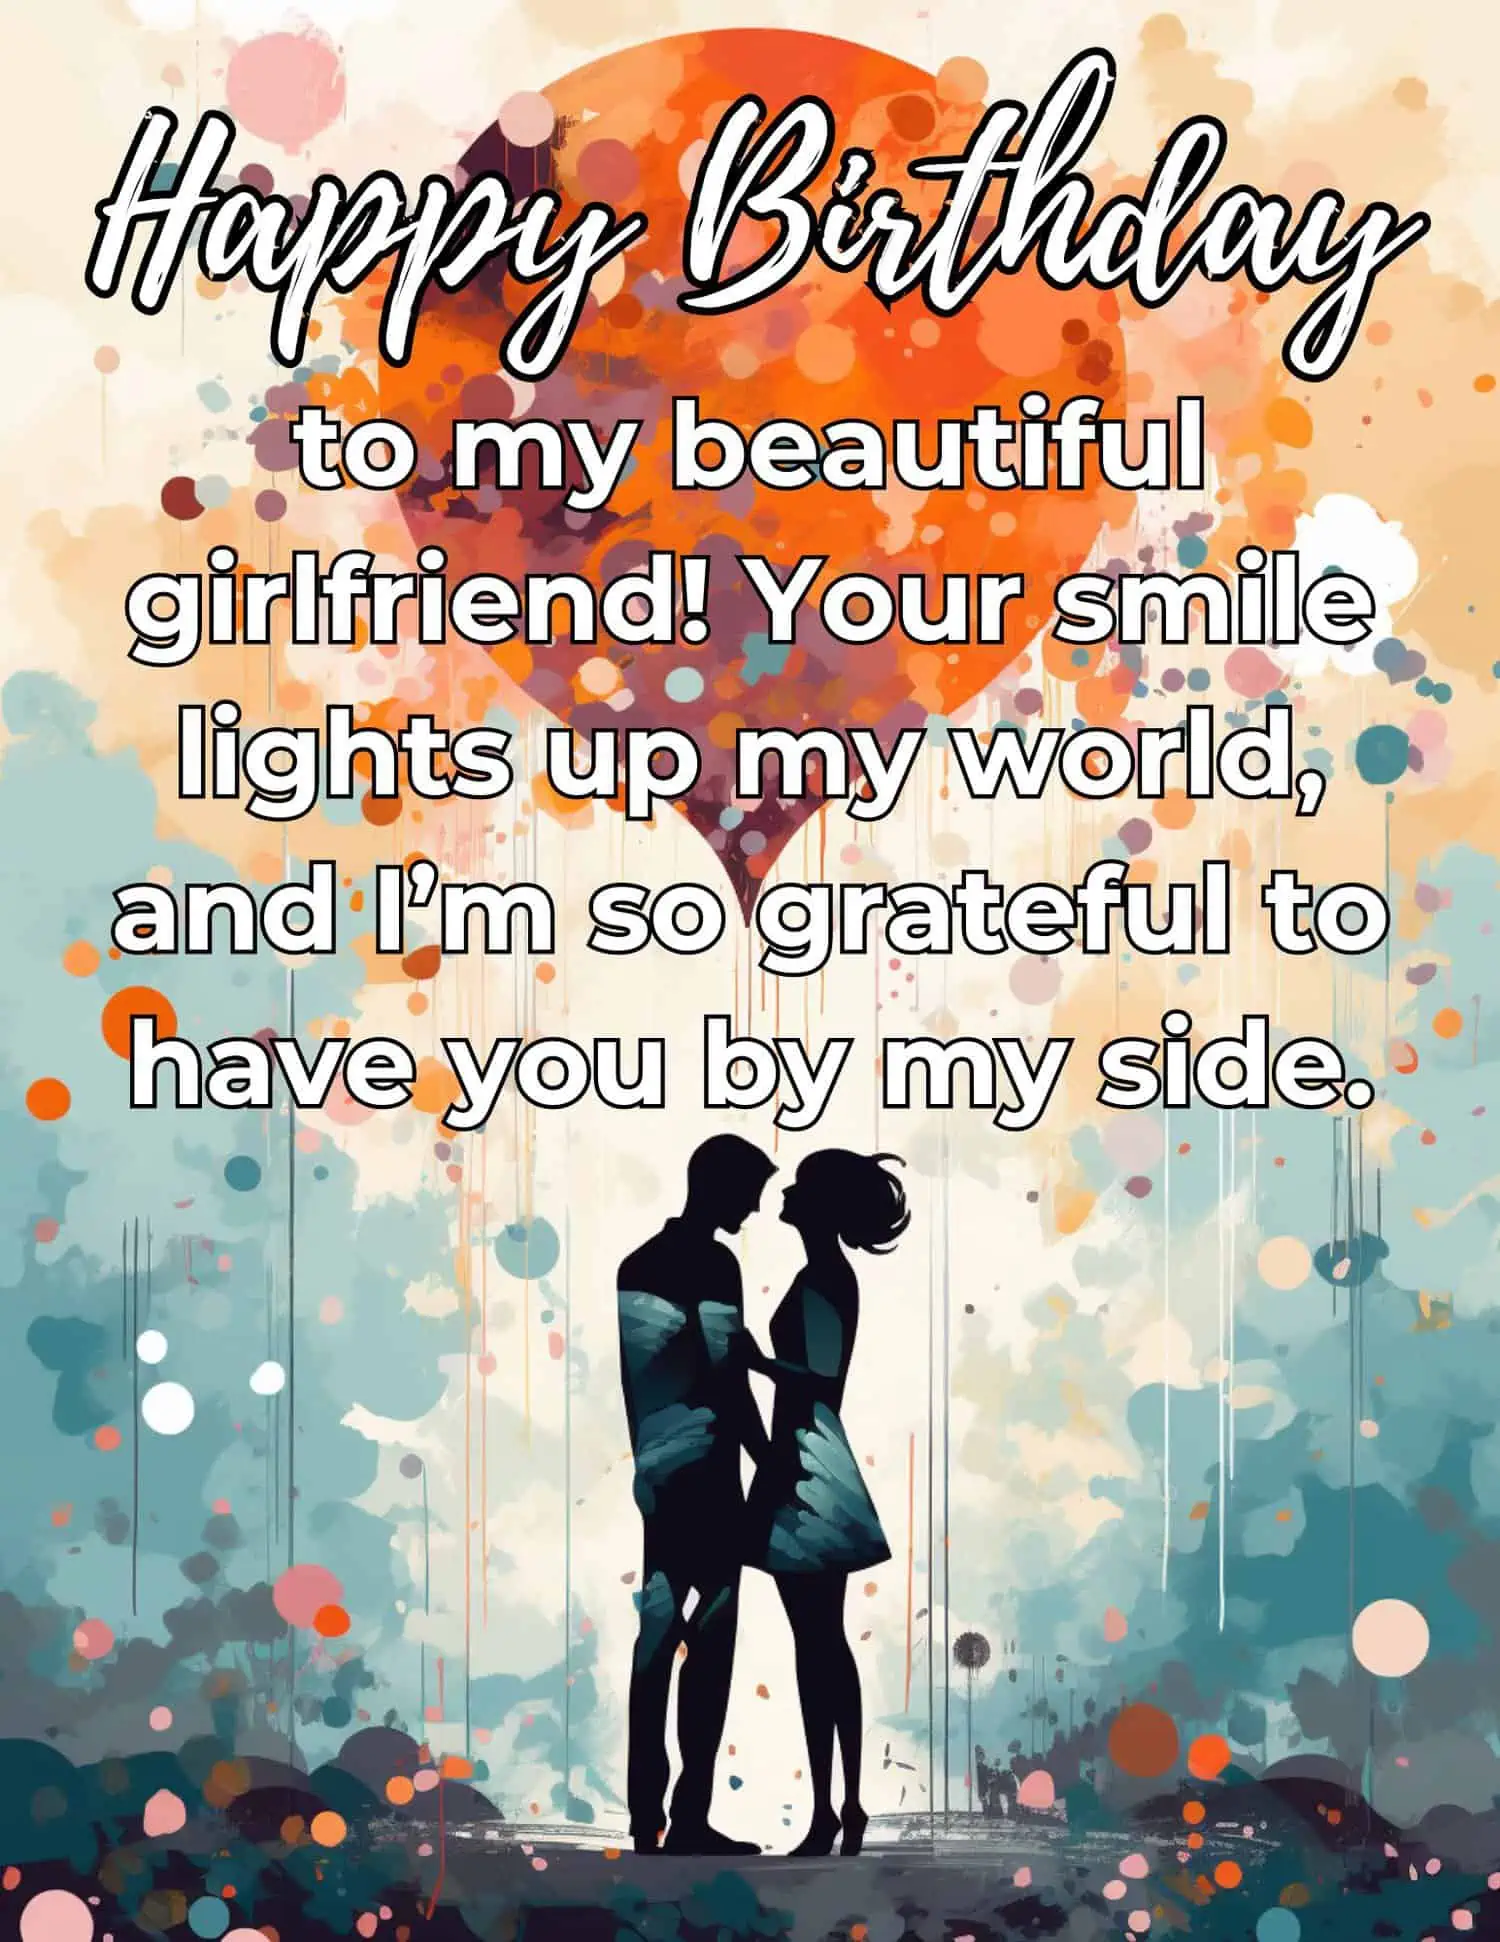 Sweet and loving birthday wishes that will make your girlfriend feel special and loved.